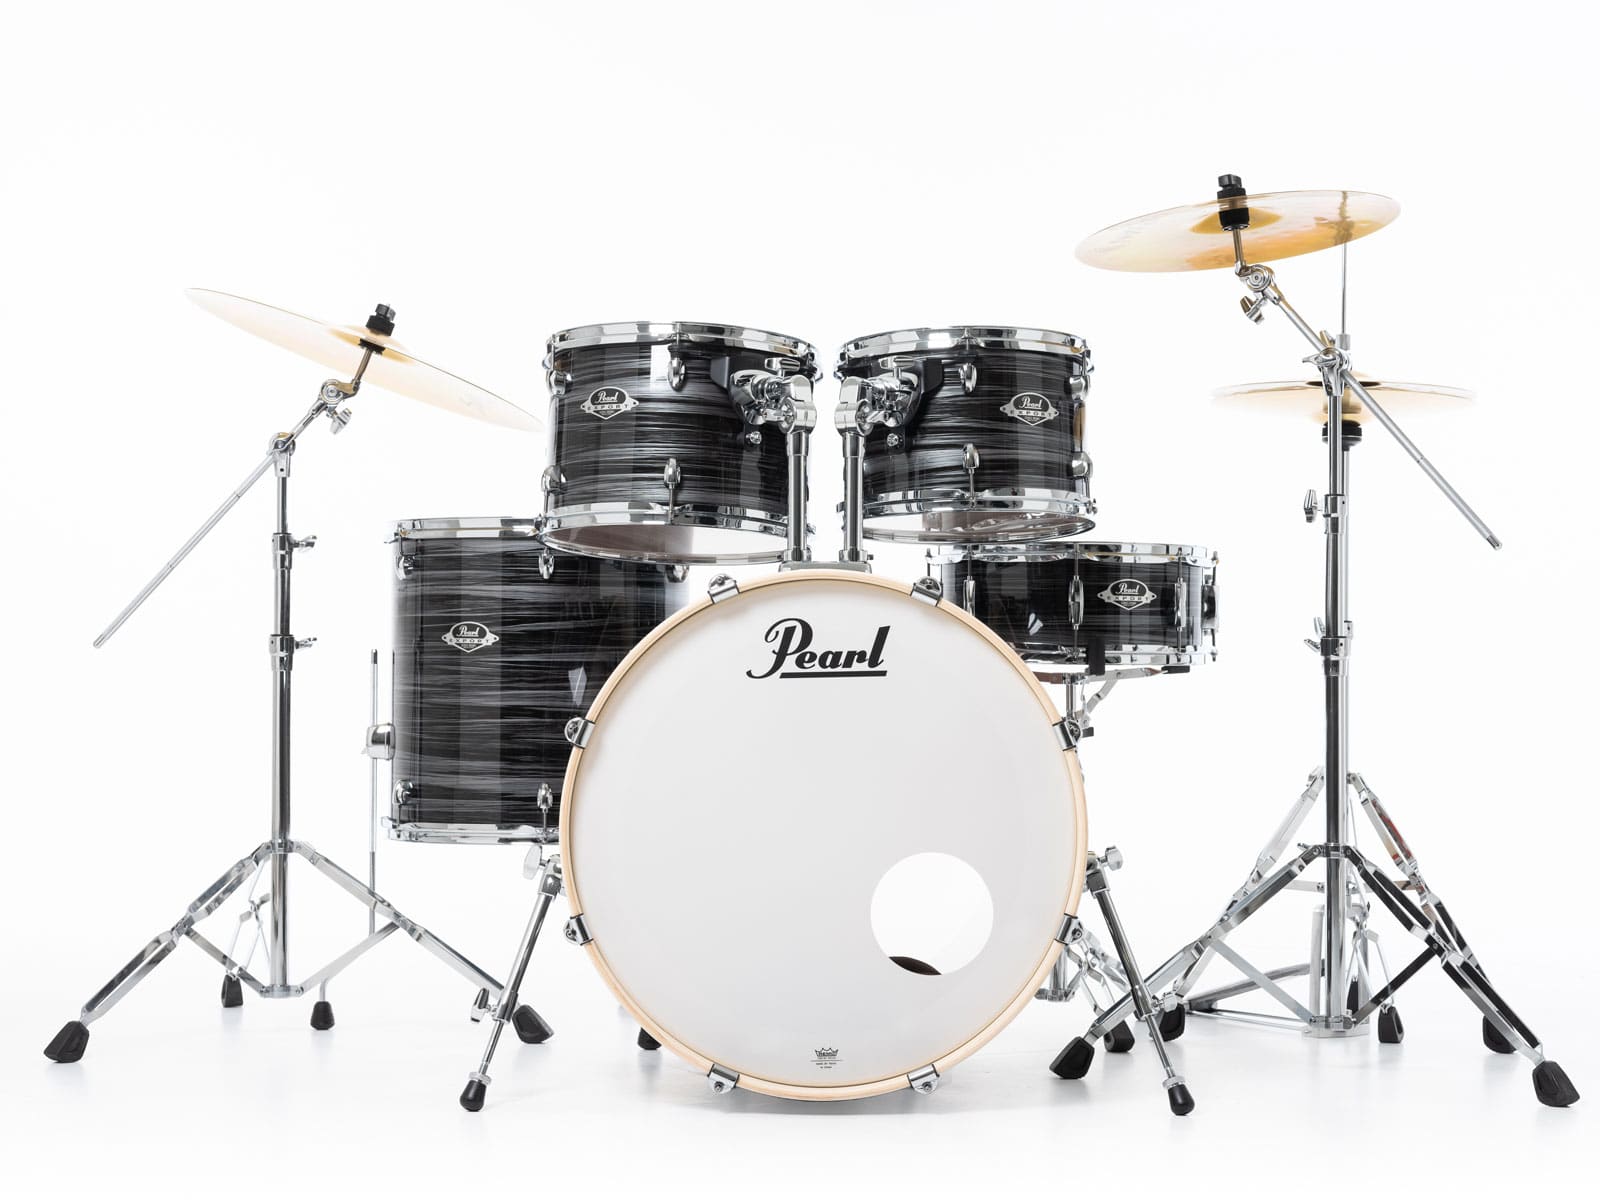 PEARL DRUMS EXPORT STAGE 22 GRAPHITE SILVER TWIST